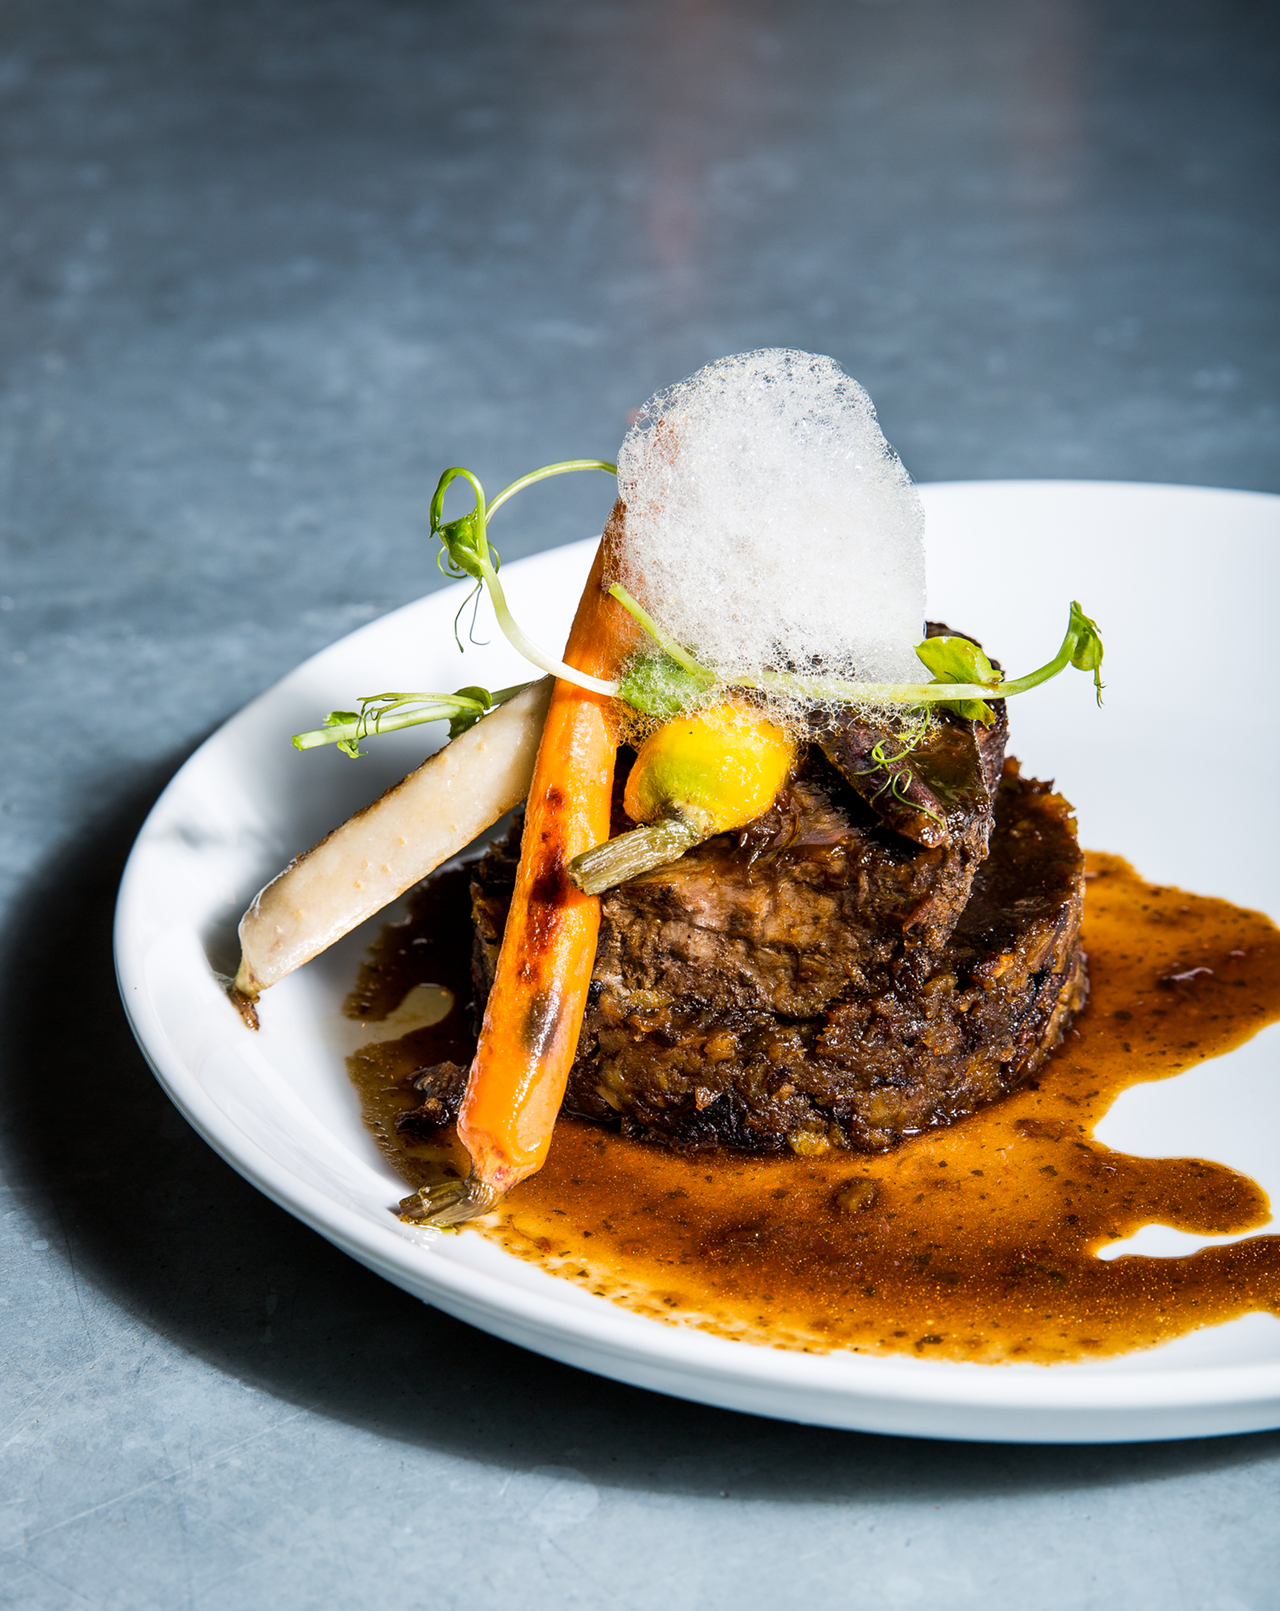 The asado negro de costilla de res: a traditional Venezuelan braised short rib with a panela base (raw sugar that when caramelized has a natural barbecue flavor), served on top of Puerto Rican mofongo (plantains, sofritos and vegetable broth, mashed and seasoned) with heirloom carrots and a sorghum foam.